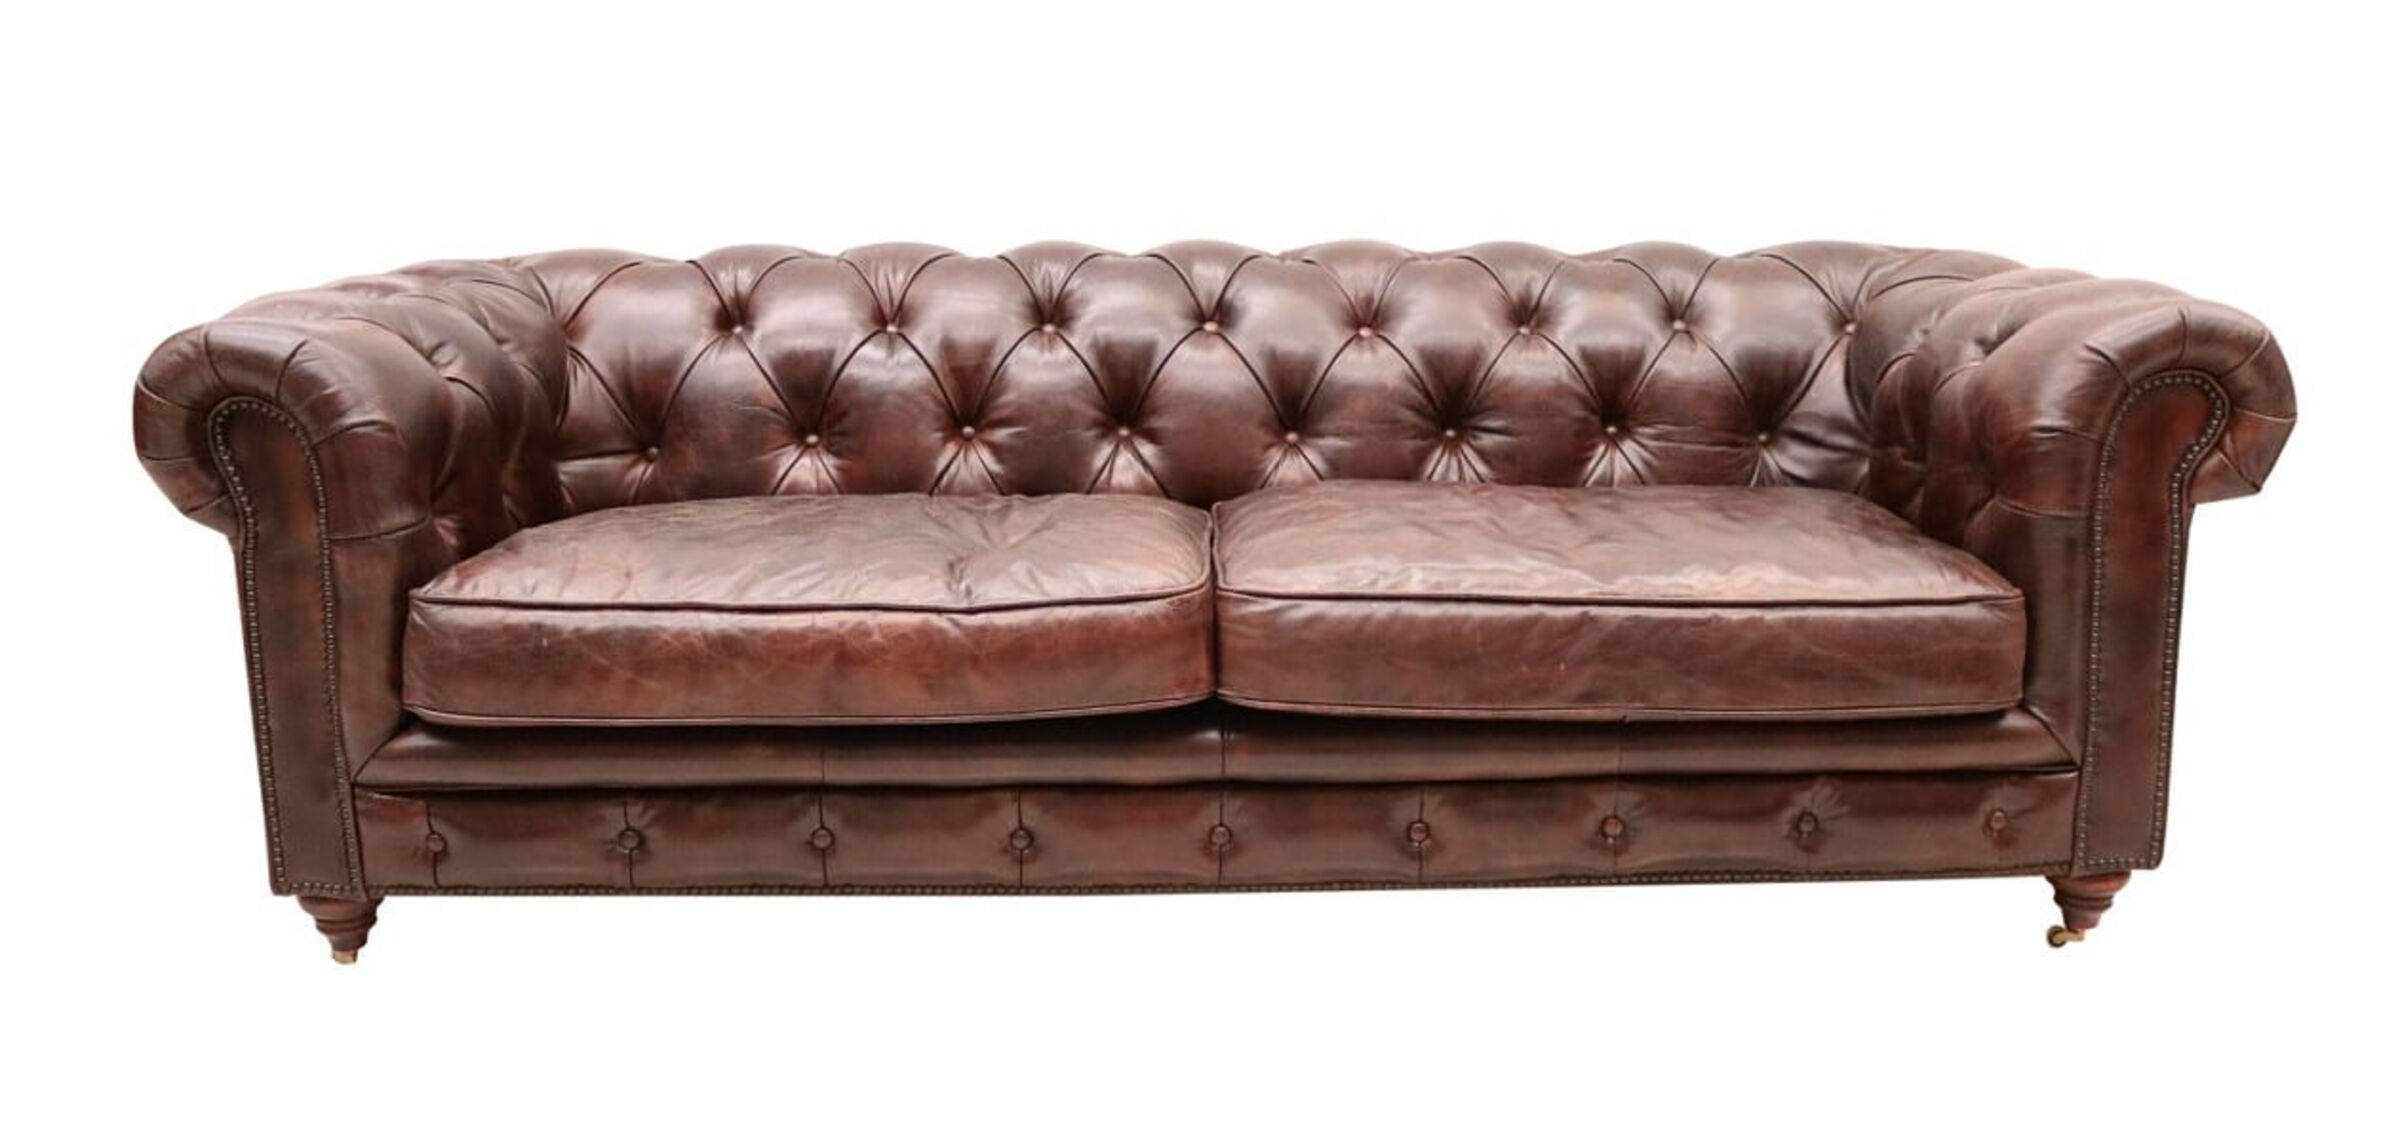 Leather Chesterfield 3 Seater Sofa, Antique Look Leather Sofa